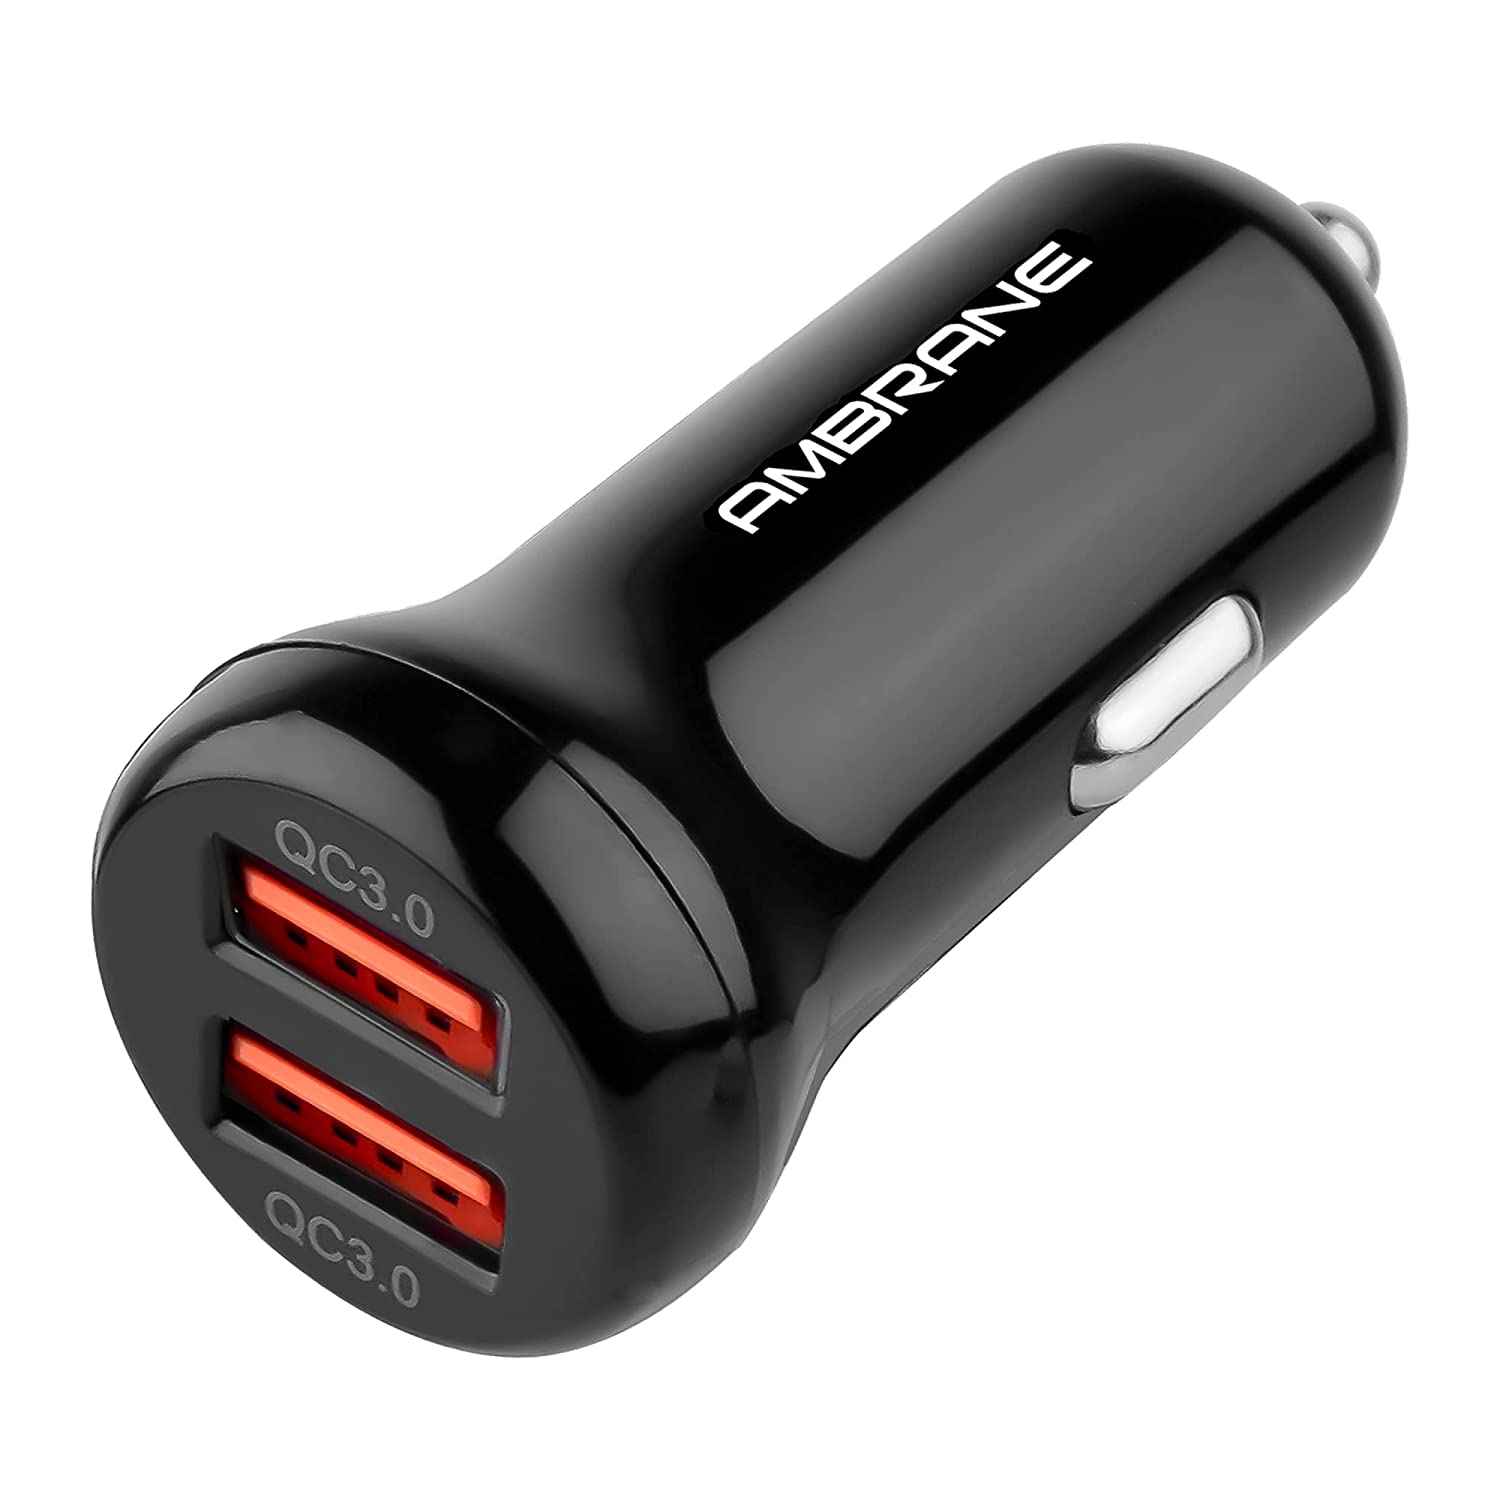 https://vlebazaar.in/image/cache/catalog/Ambrane-36W-Fast-Car-Charger-with-Dual-Output-Qualcomm-Quick-Charge-30-C/Ambrane-36W-Fast-Car-Charger-with-Dual-Output-Qualcomm-Quick-Charge-30-Compatibl-1500x1500.jpg